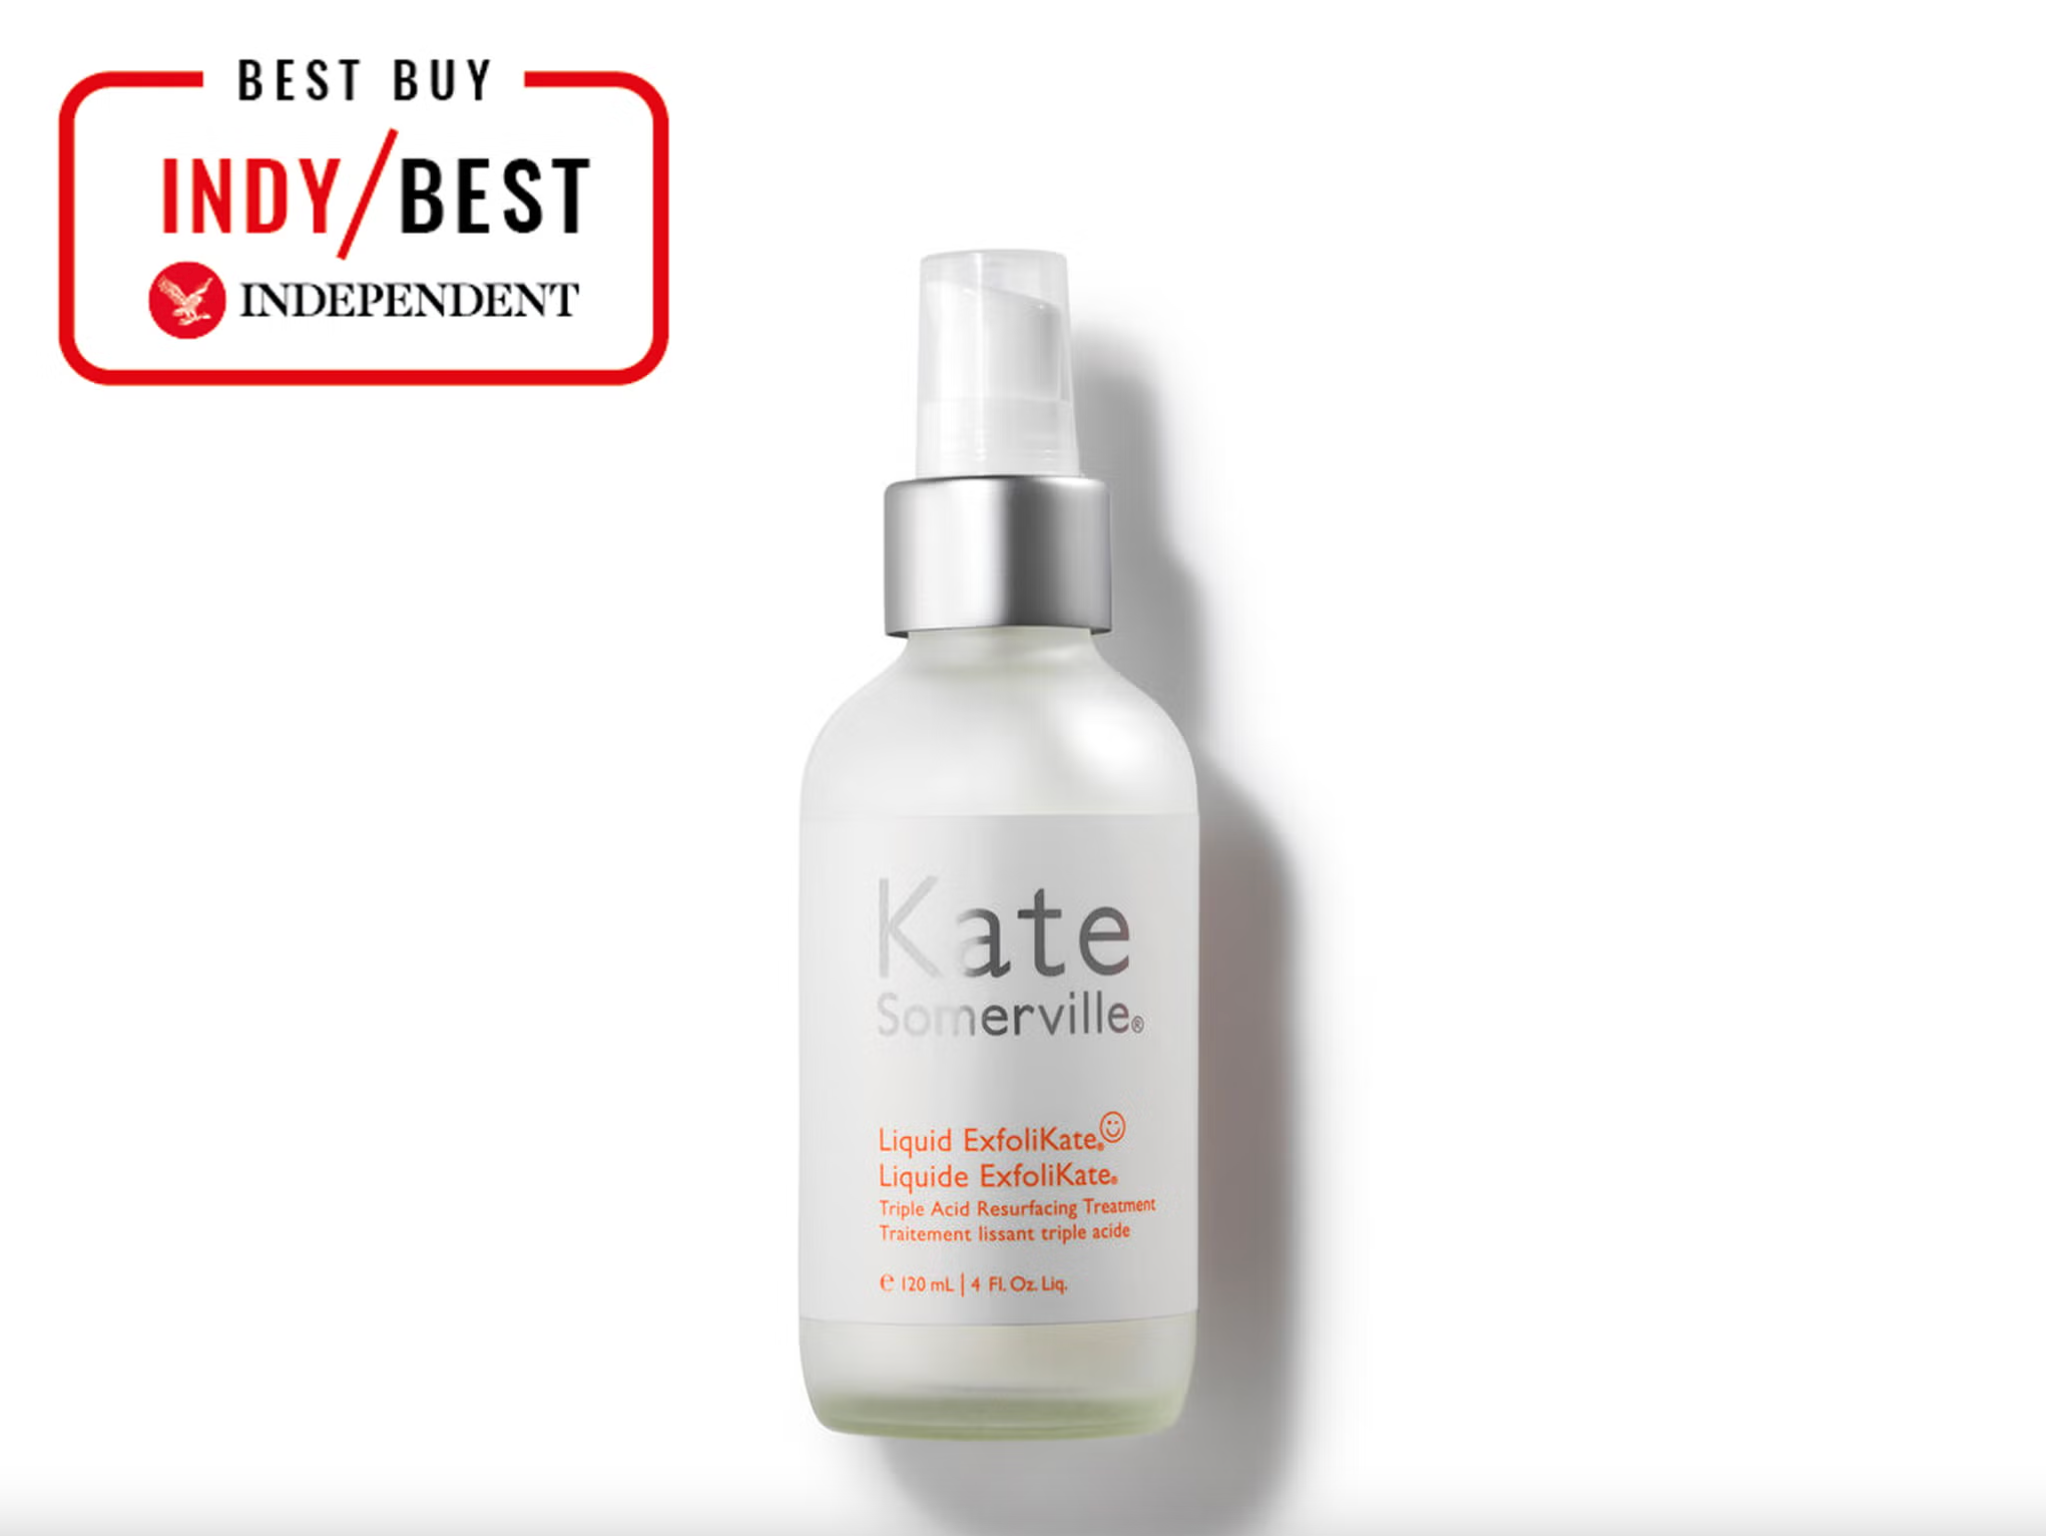 This toner is fast acting for smoothing textured skin